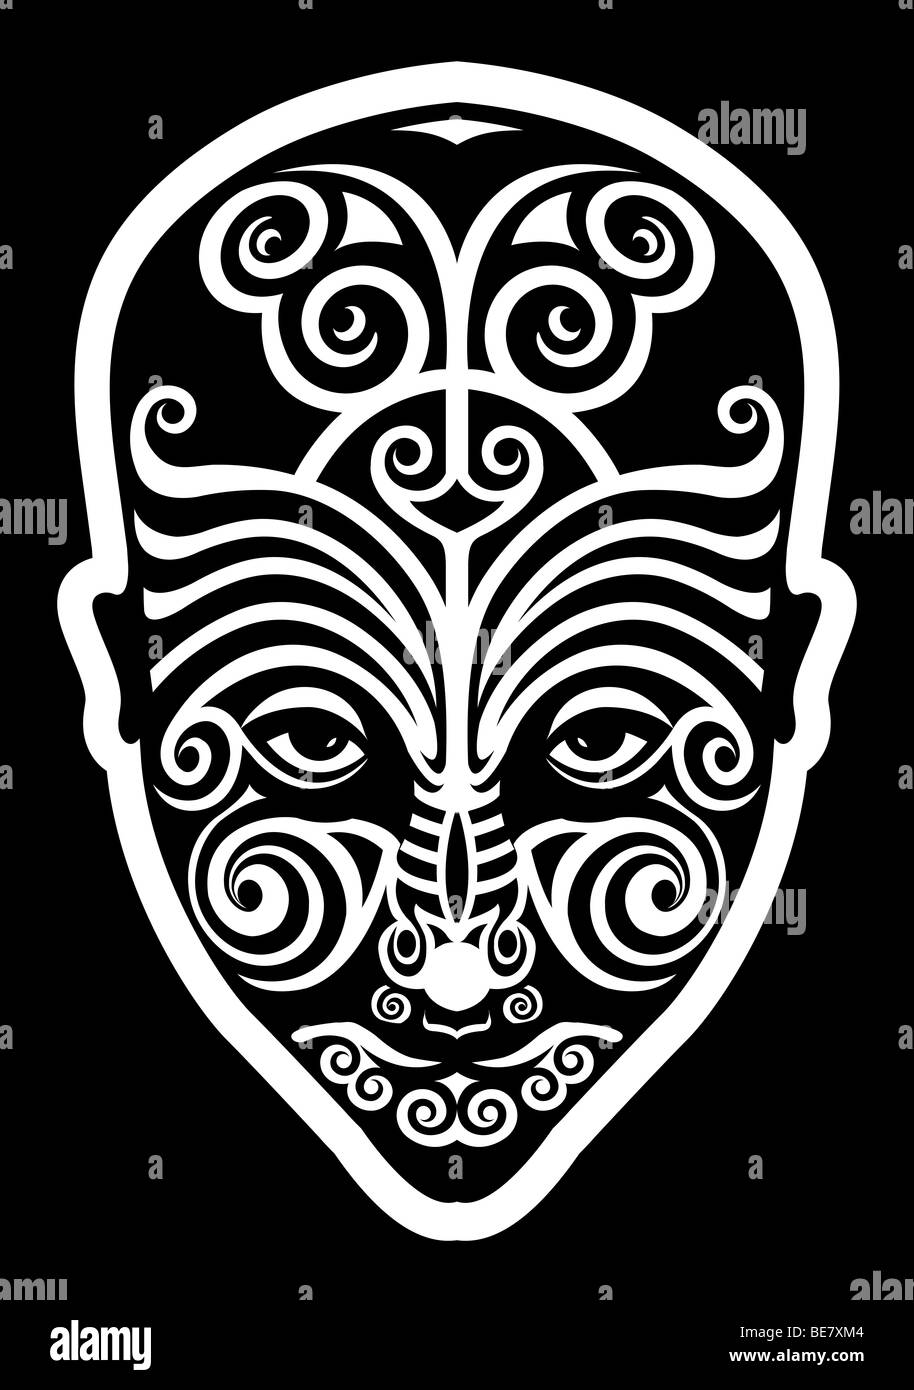 Snapchat removes Māori face tattoo filter after backlash over disrespect  to culture  World News